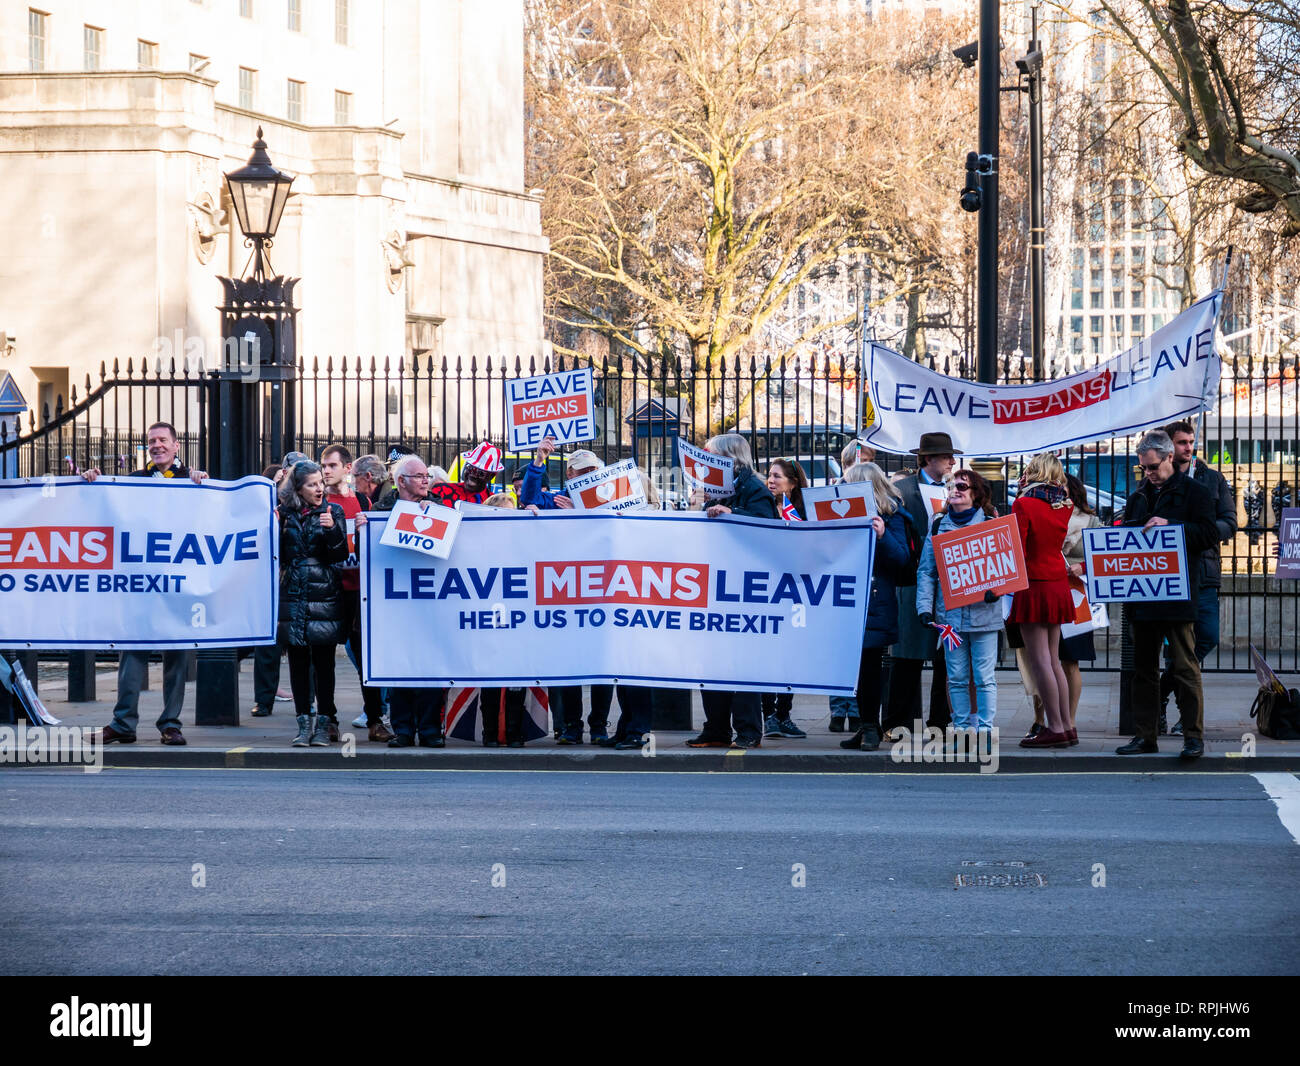 London, England - February 14, 2019: Group of people protesting in front of Parliament to support the Brexit of England out of European Union Stock Photo